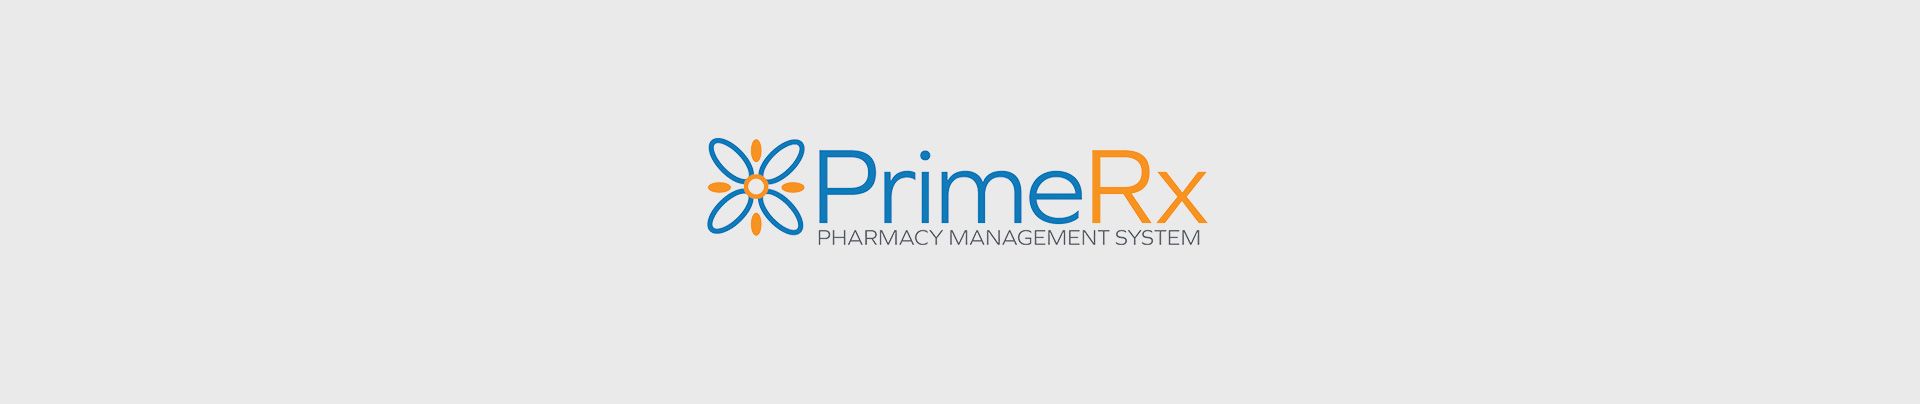 PrimeRx pharmacy management software for independent pharmacies